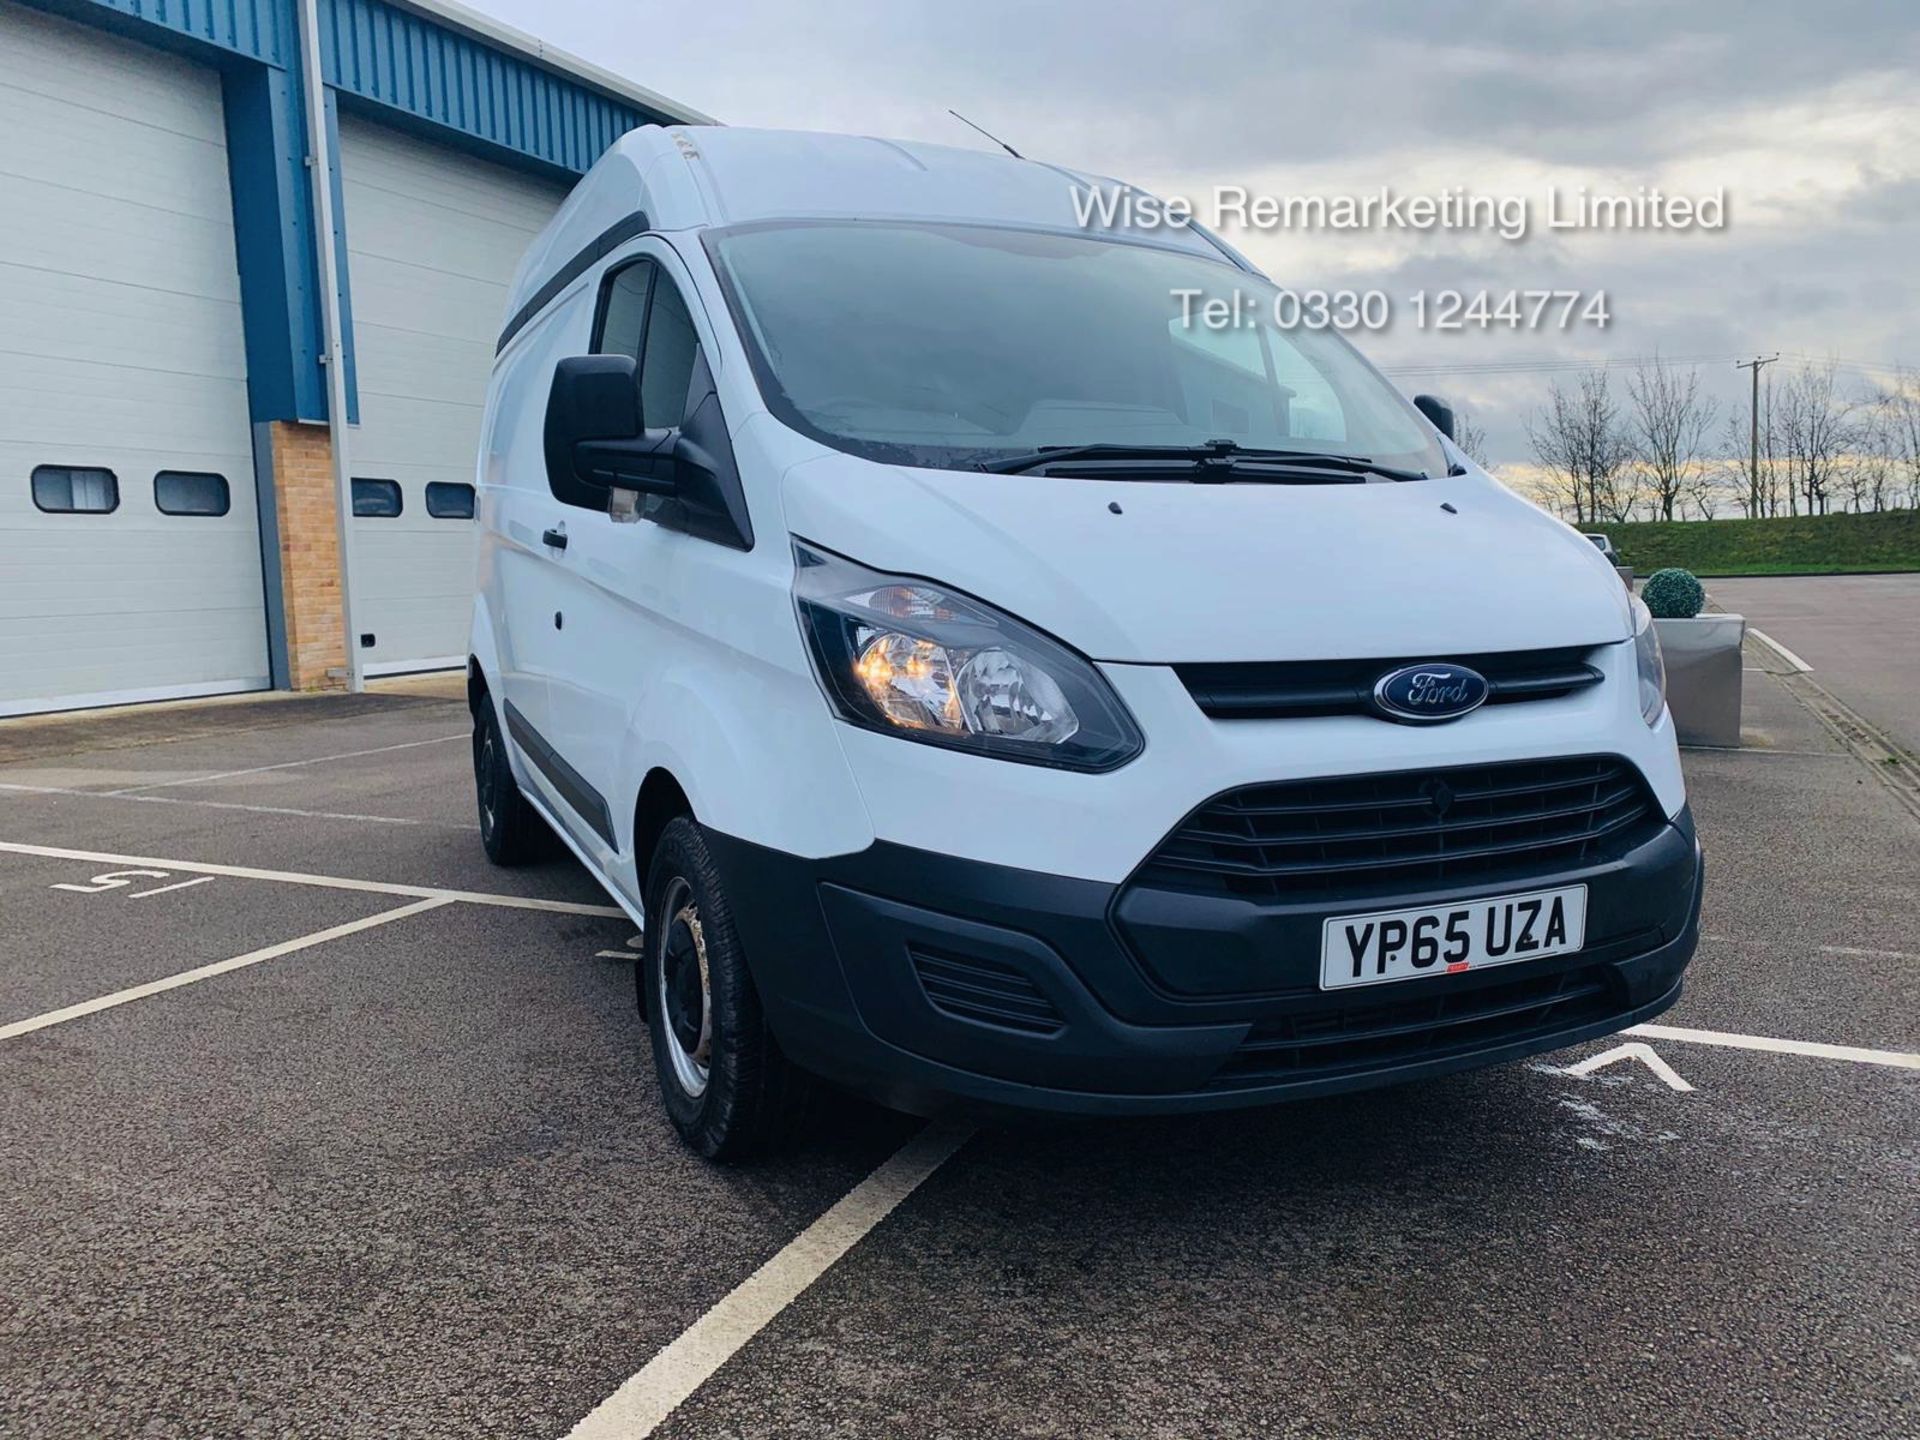 (RESERVE MET) Ford Transit Custom 2.2 TDCI 290 **HIGH ROOF** - 2016 Model - AIR CON- 1 OWNER- FSH- - Image 9 of 24